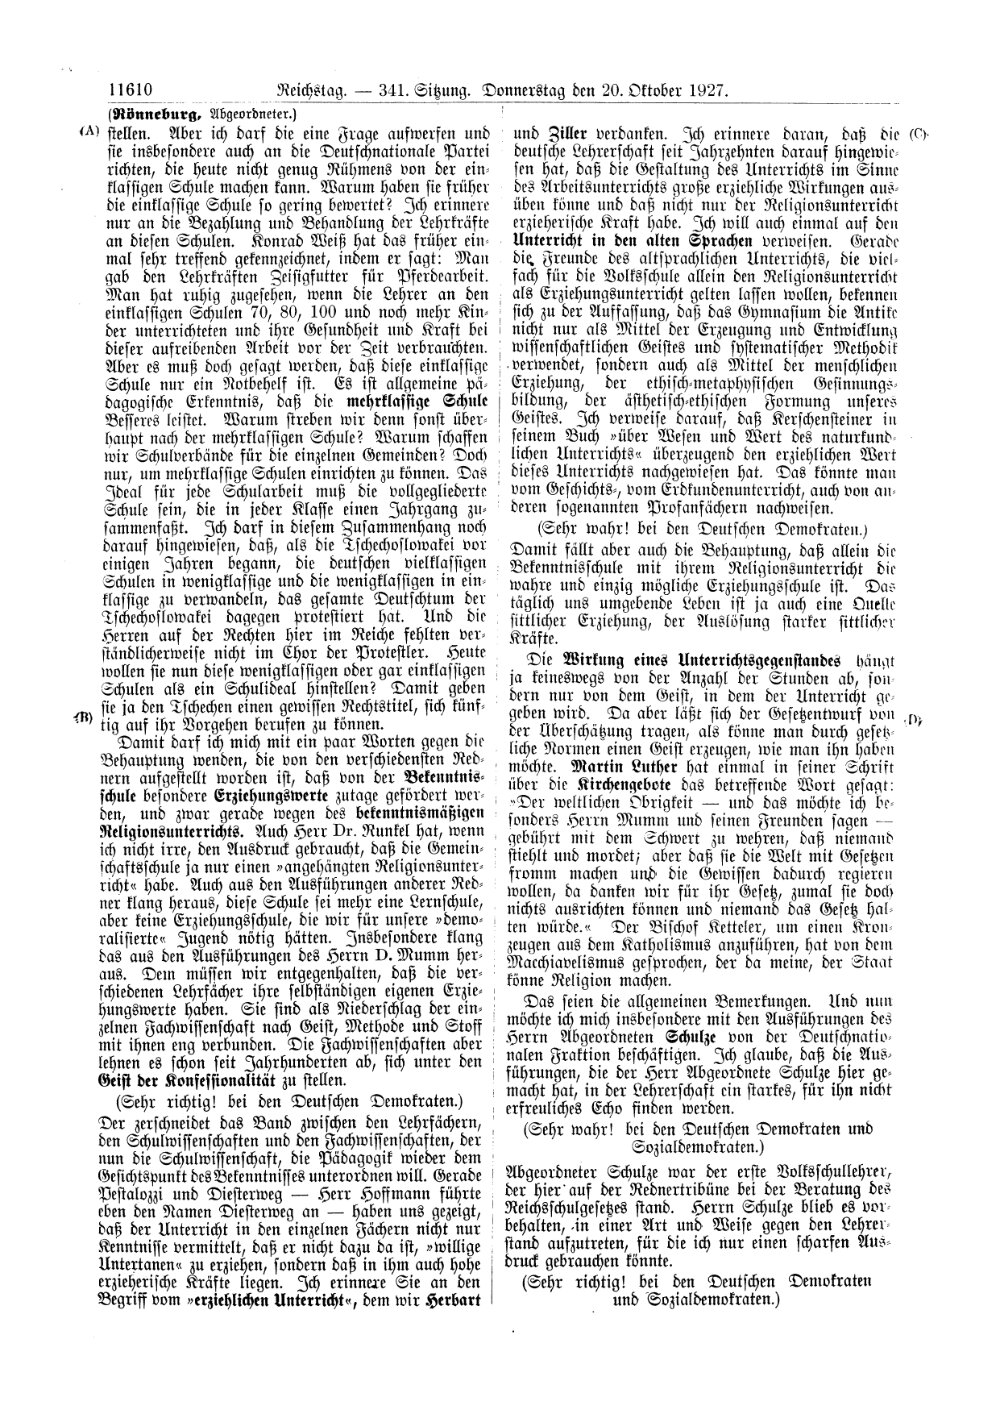 Scan of page 11610